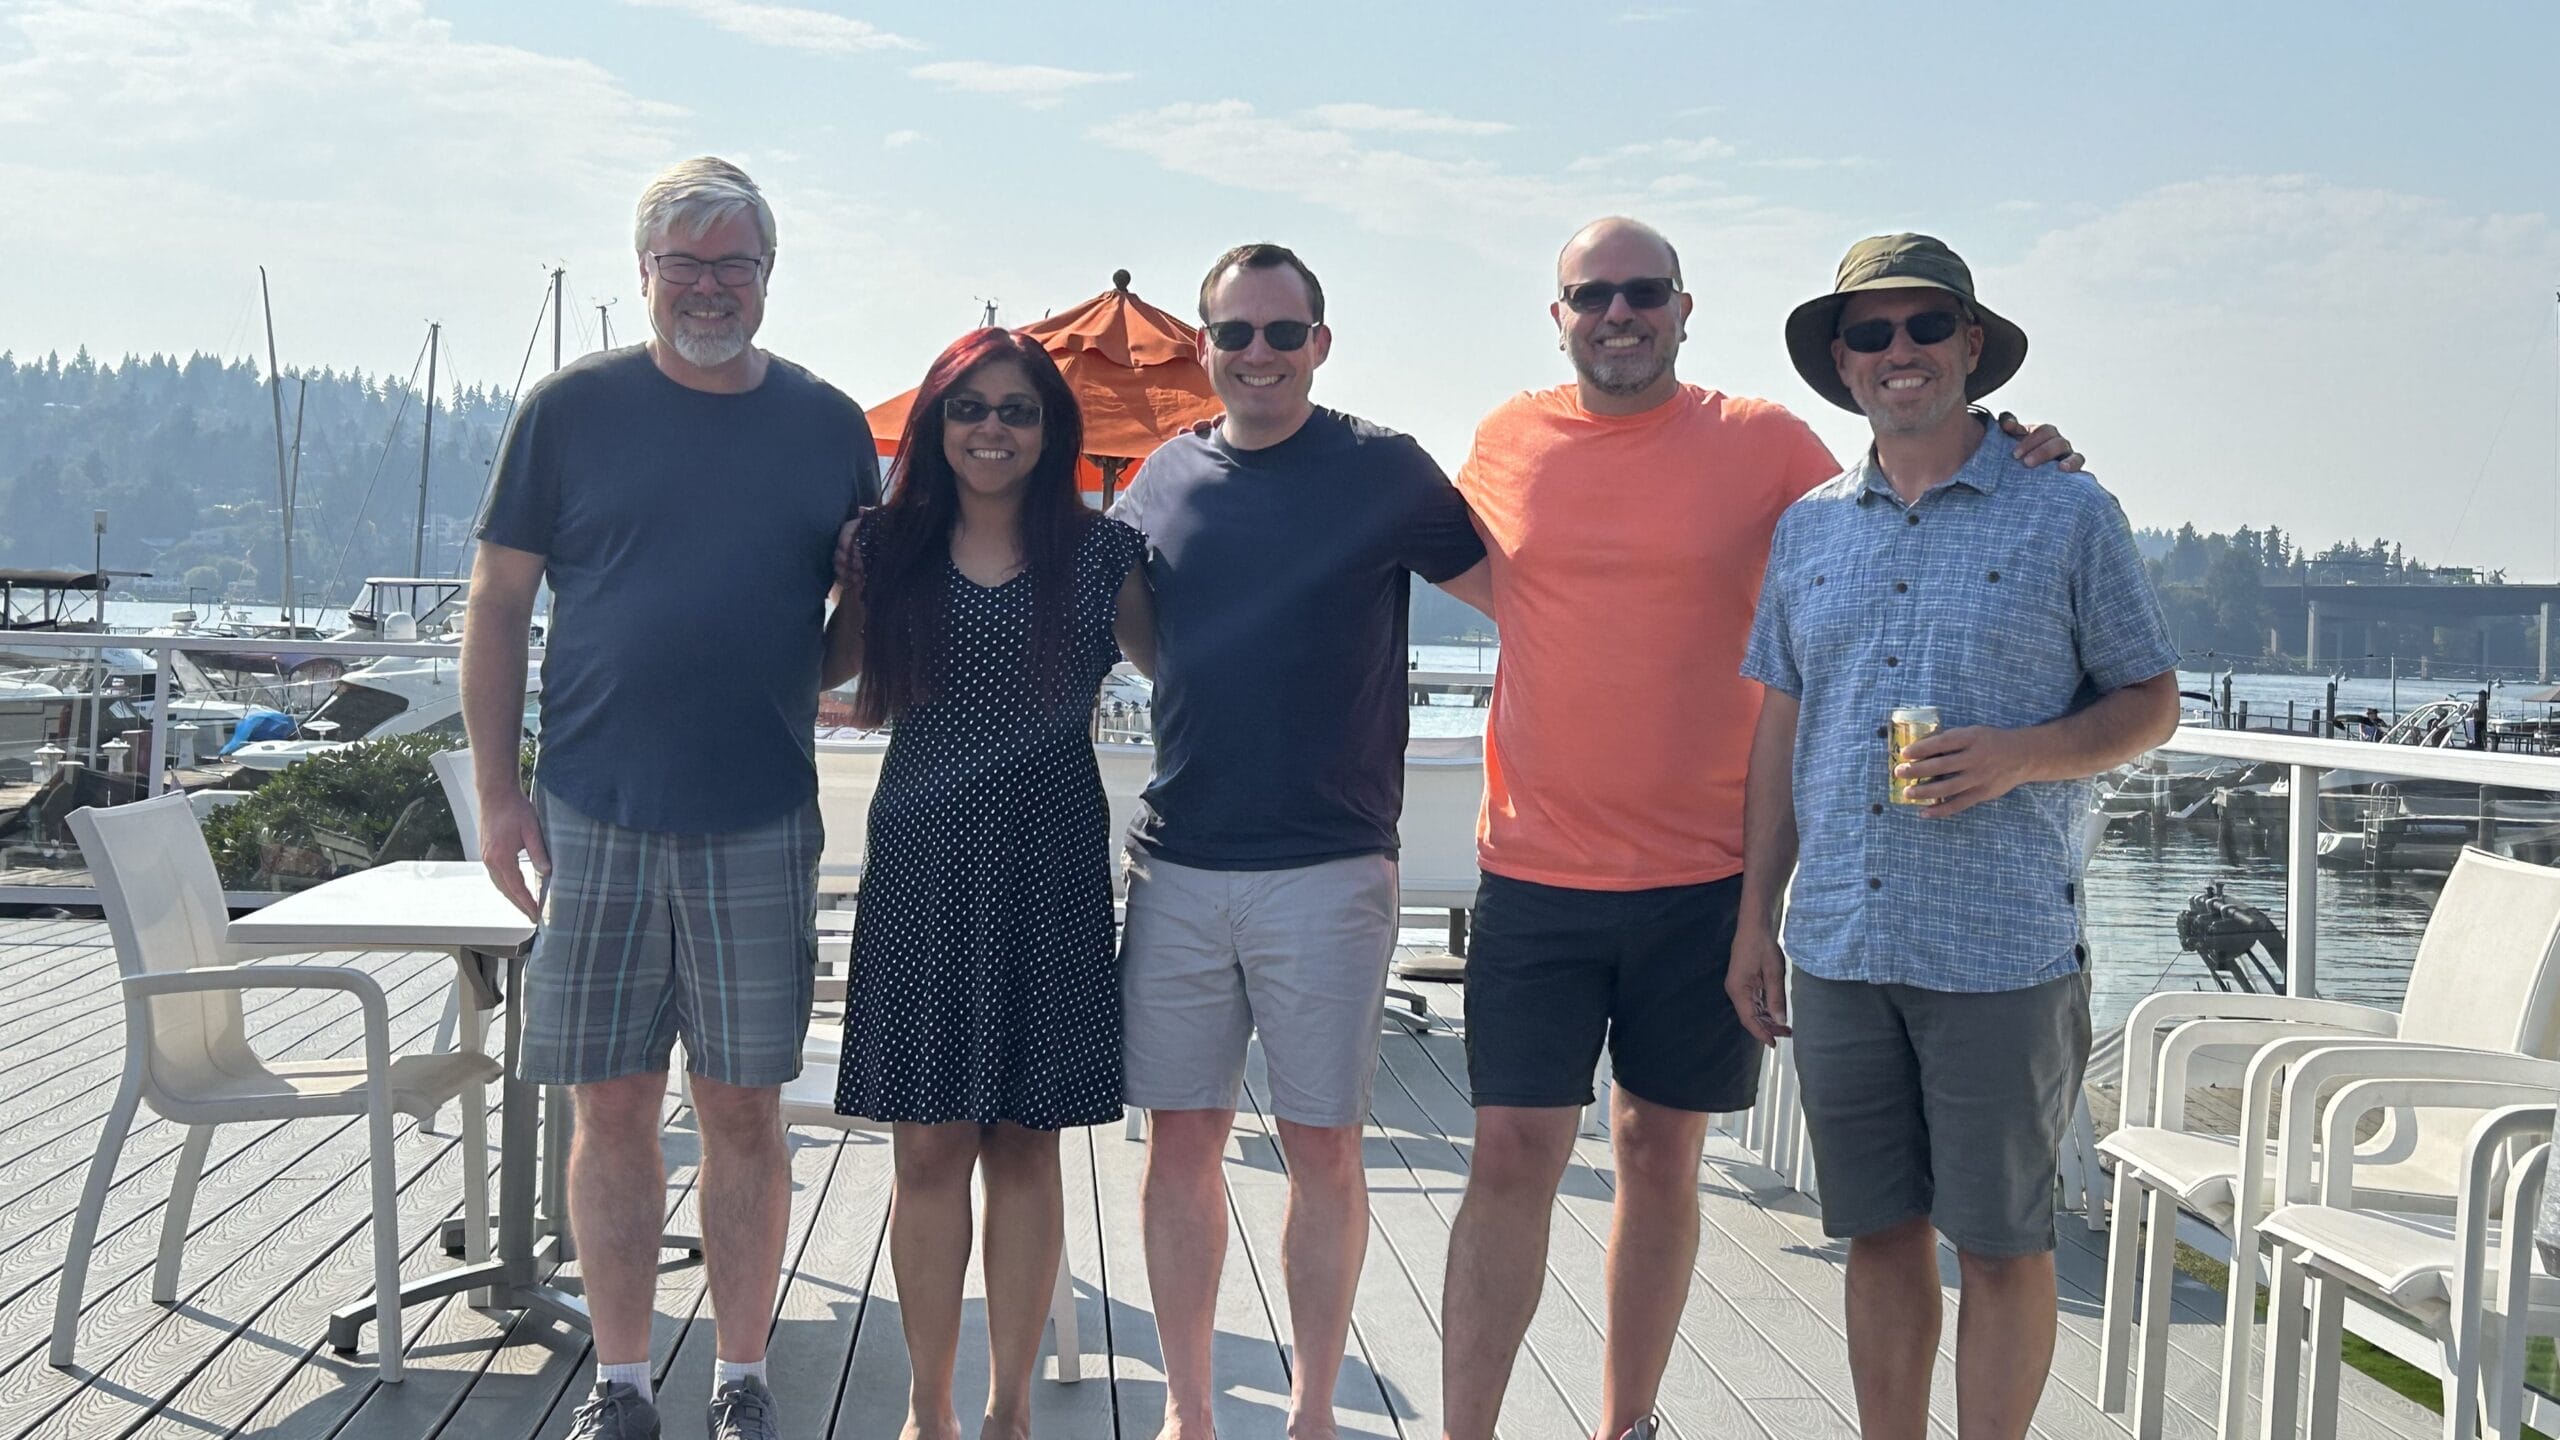 Five people in casual summer clothing stand on a dock together.